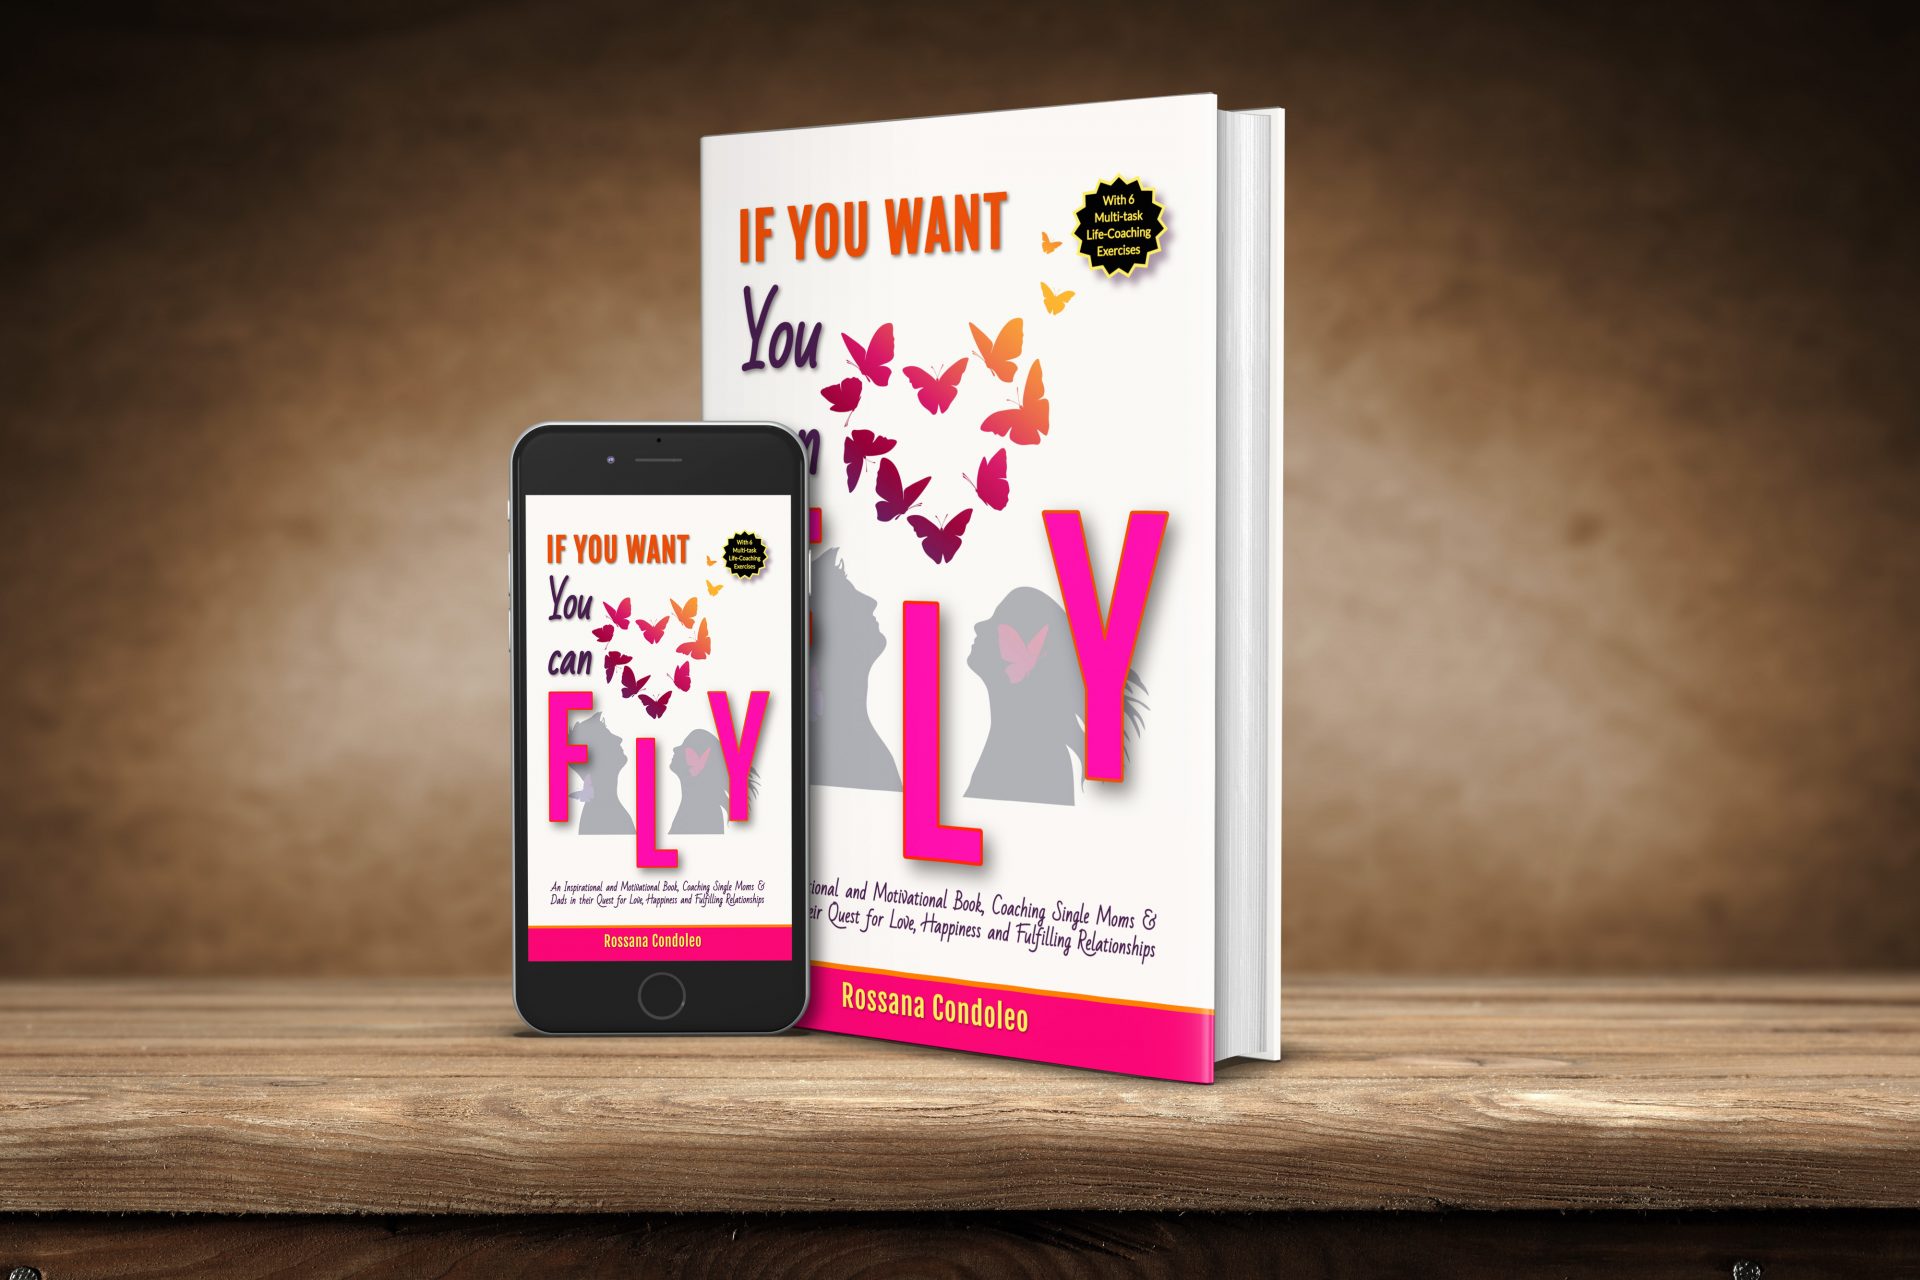 Single parenting book and ebook Single Parent Book If You Want You Can Fly by Rossana Condoleo